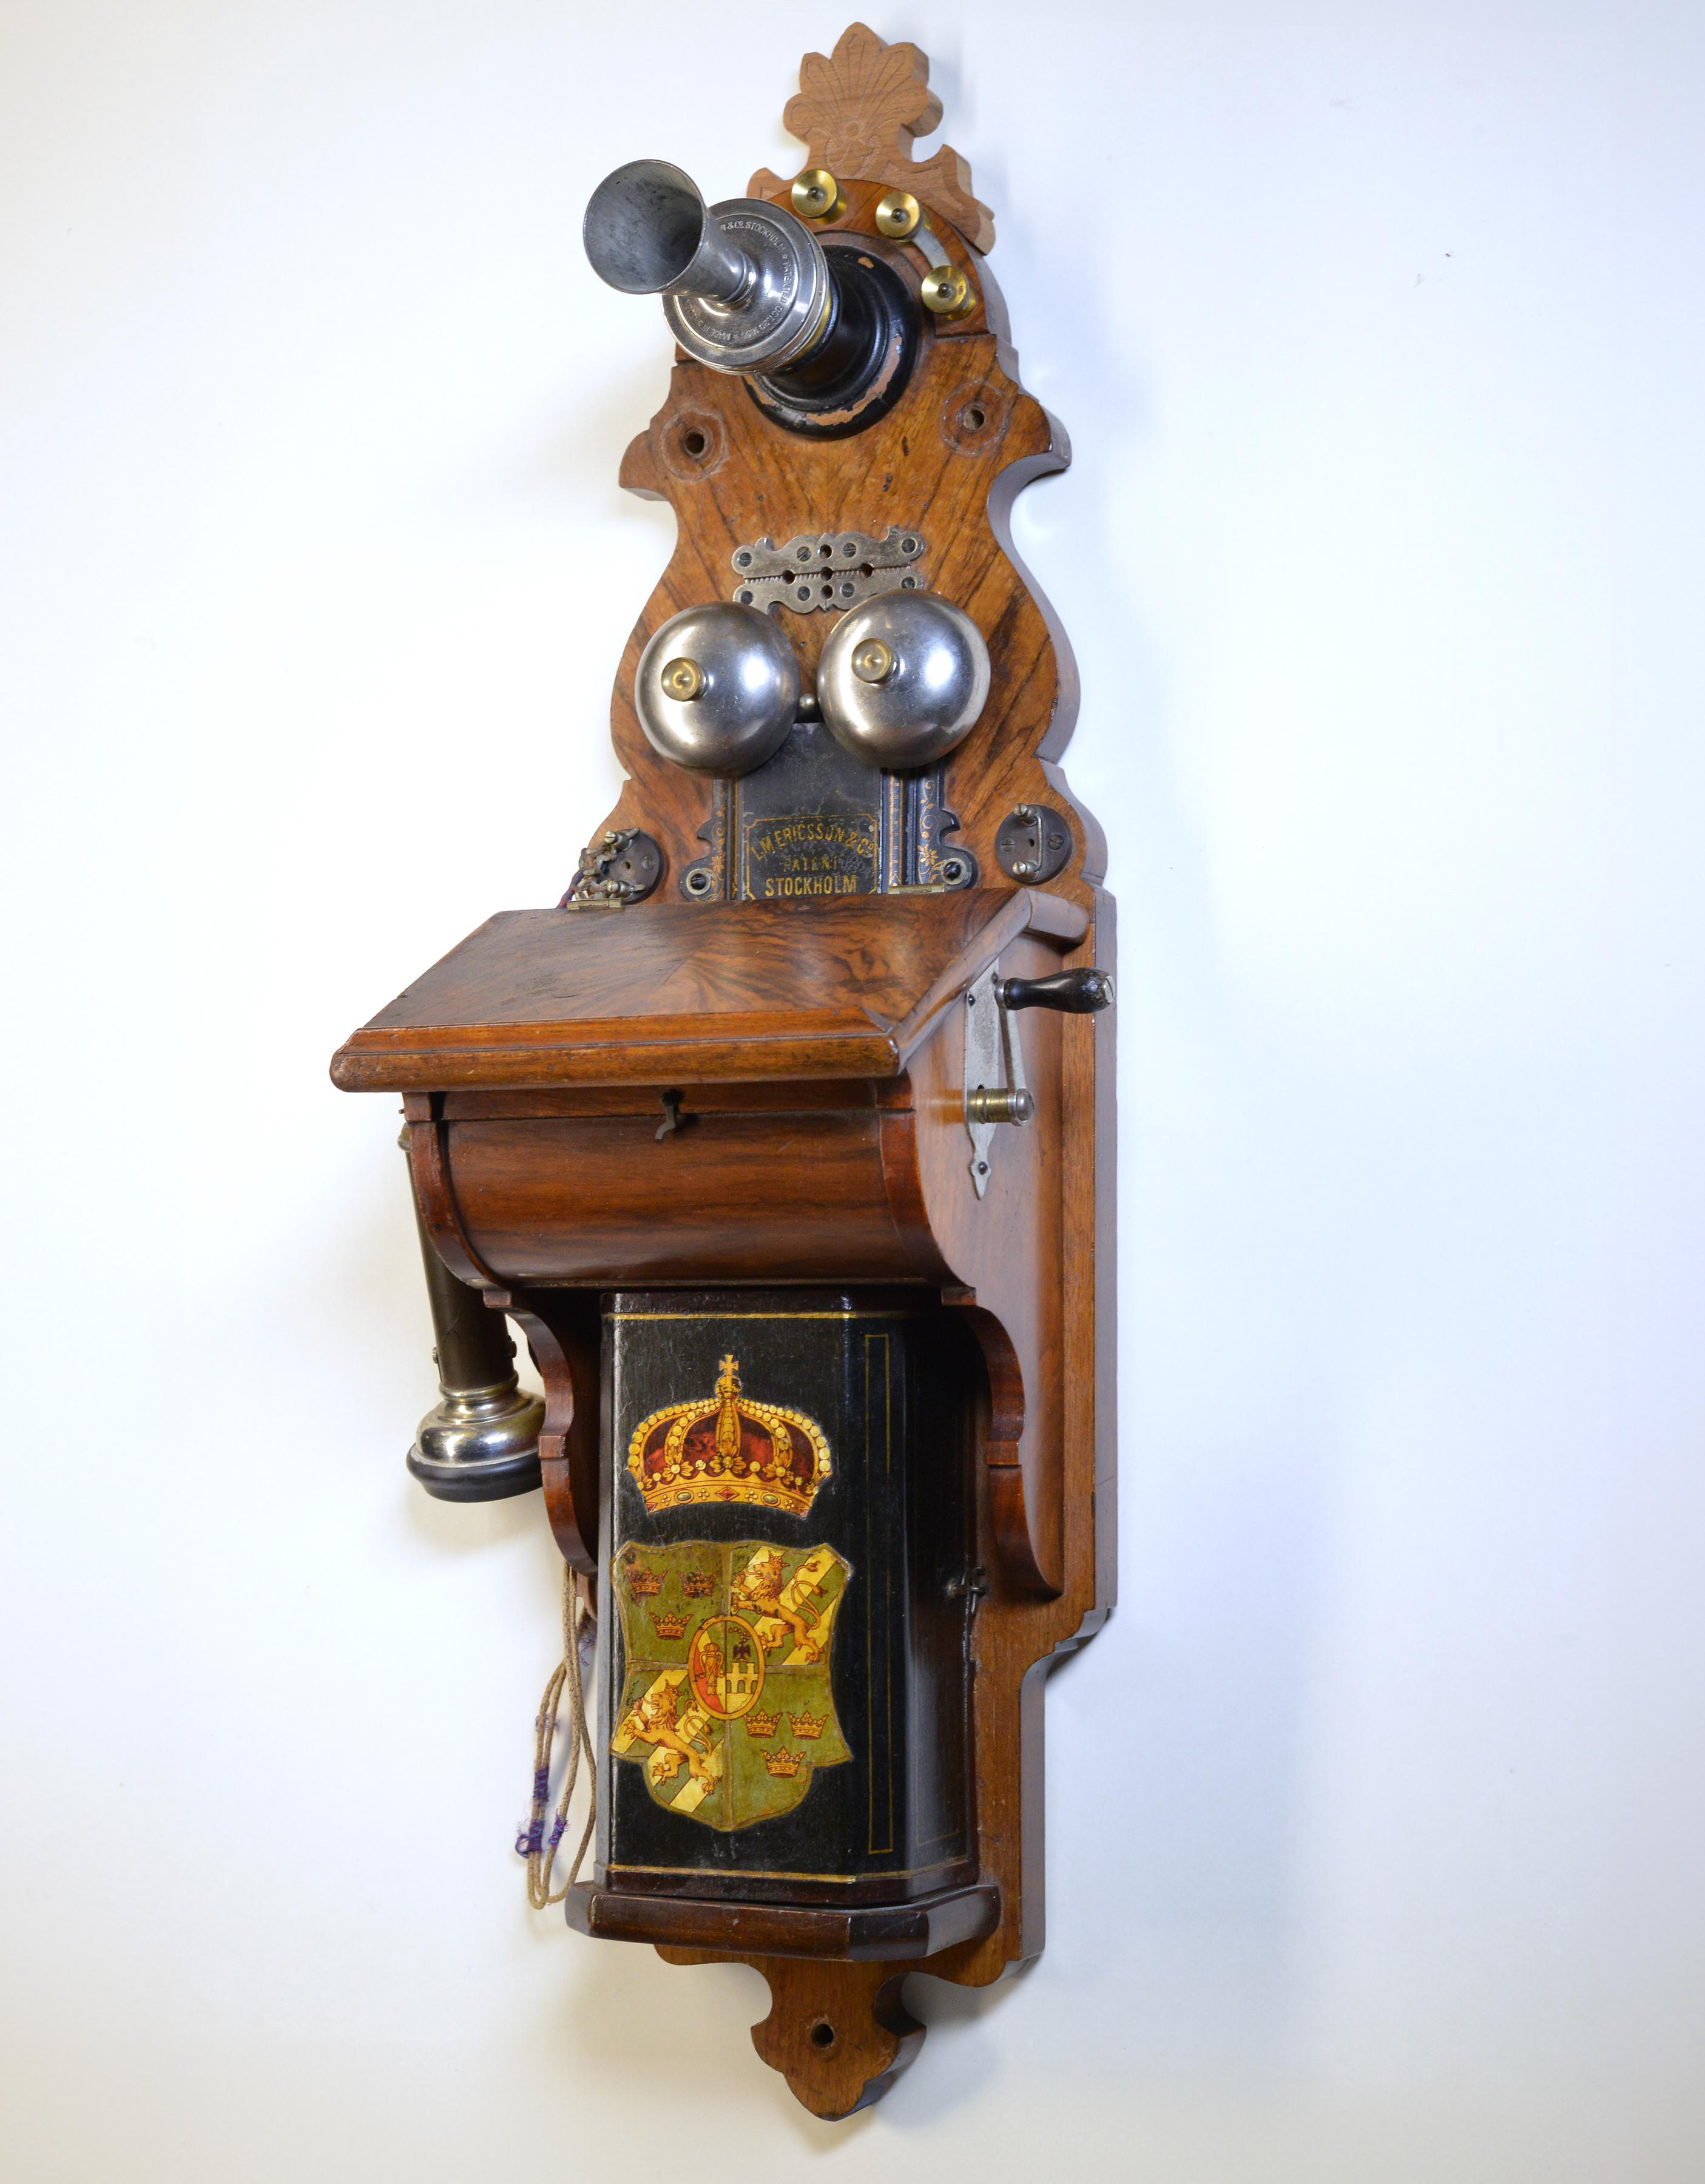 Telephone set, AB LM Ericsson, figure no. 1 or 3 in the 1889 catalogue, case in walnut, battery cover with lithographed decoration of large national coat of arms. Inside label stating that the phone was refurbished at the Royal Telegraph Office's